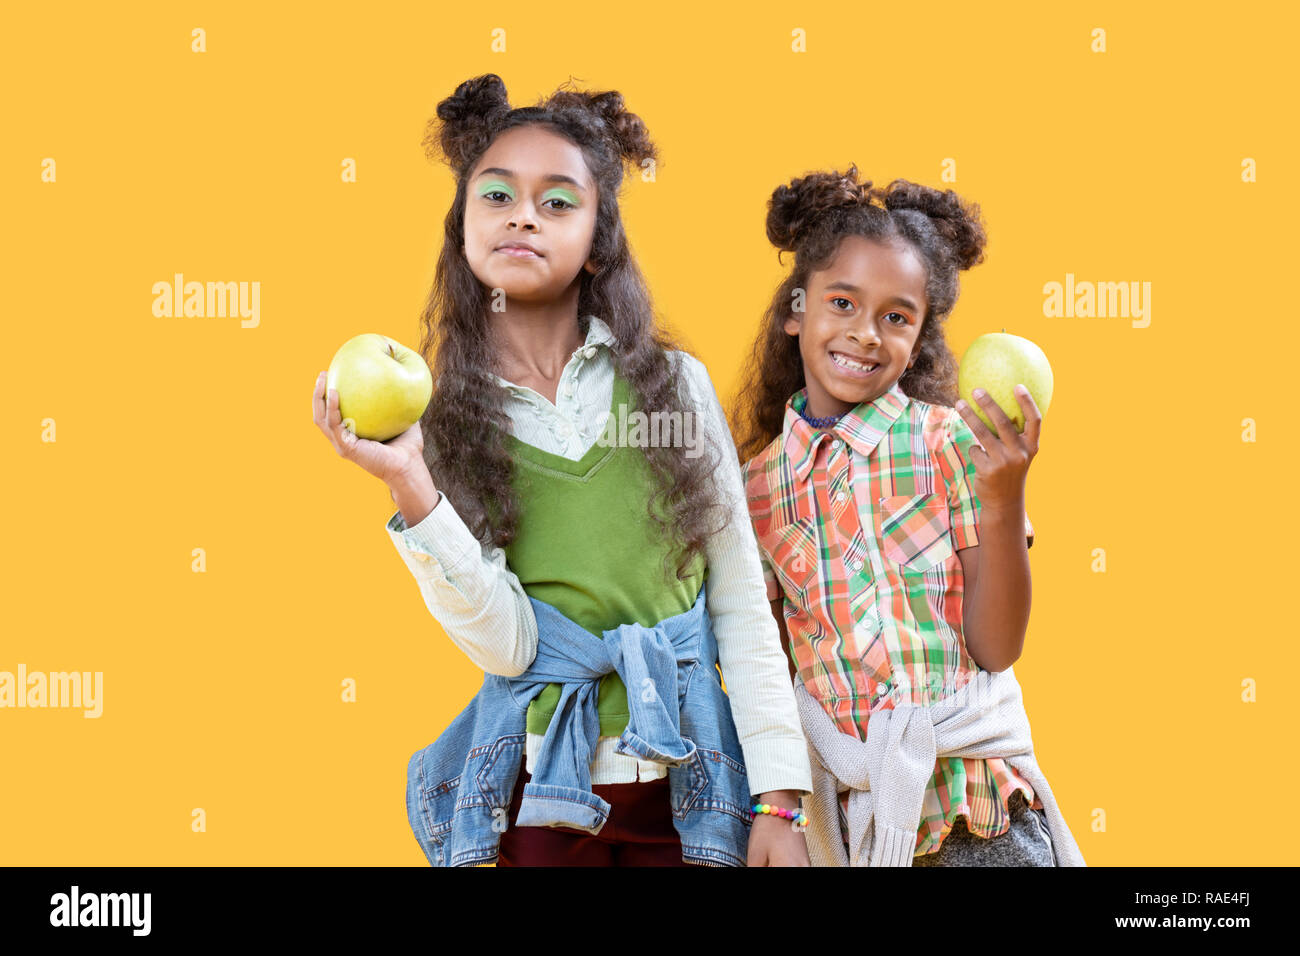 Nice happy girls showing you healthy food Stock Photo